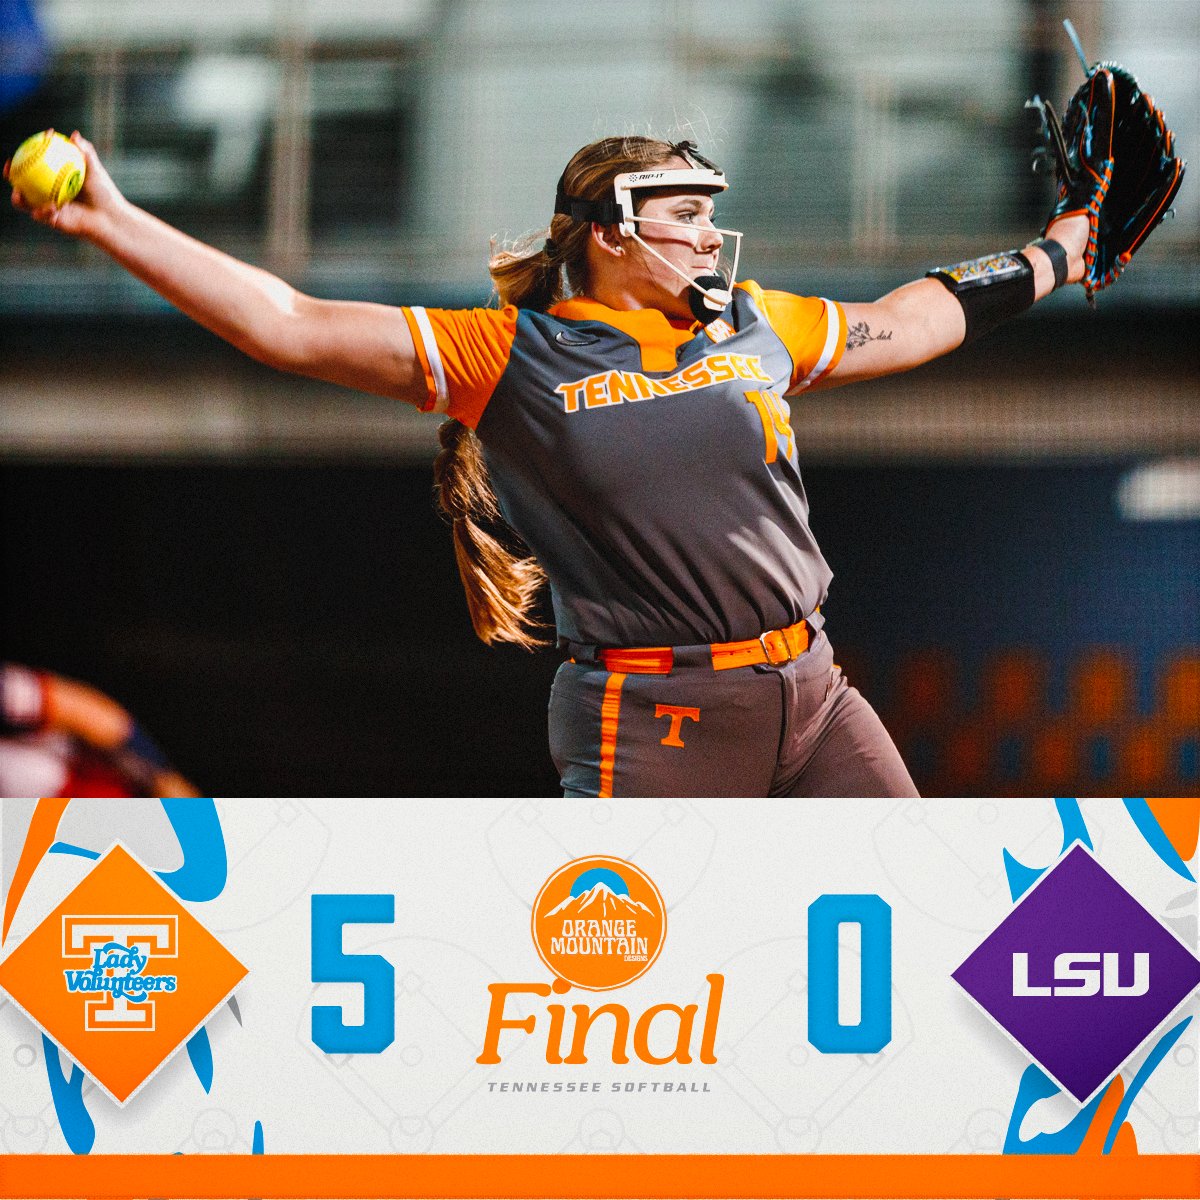 Tennessee Softball on Twitter "Tennessee takes the series opener over